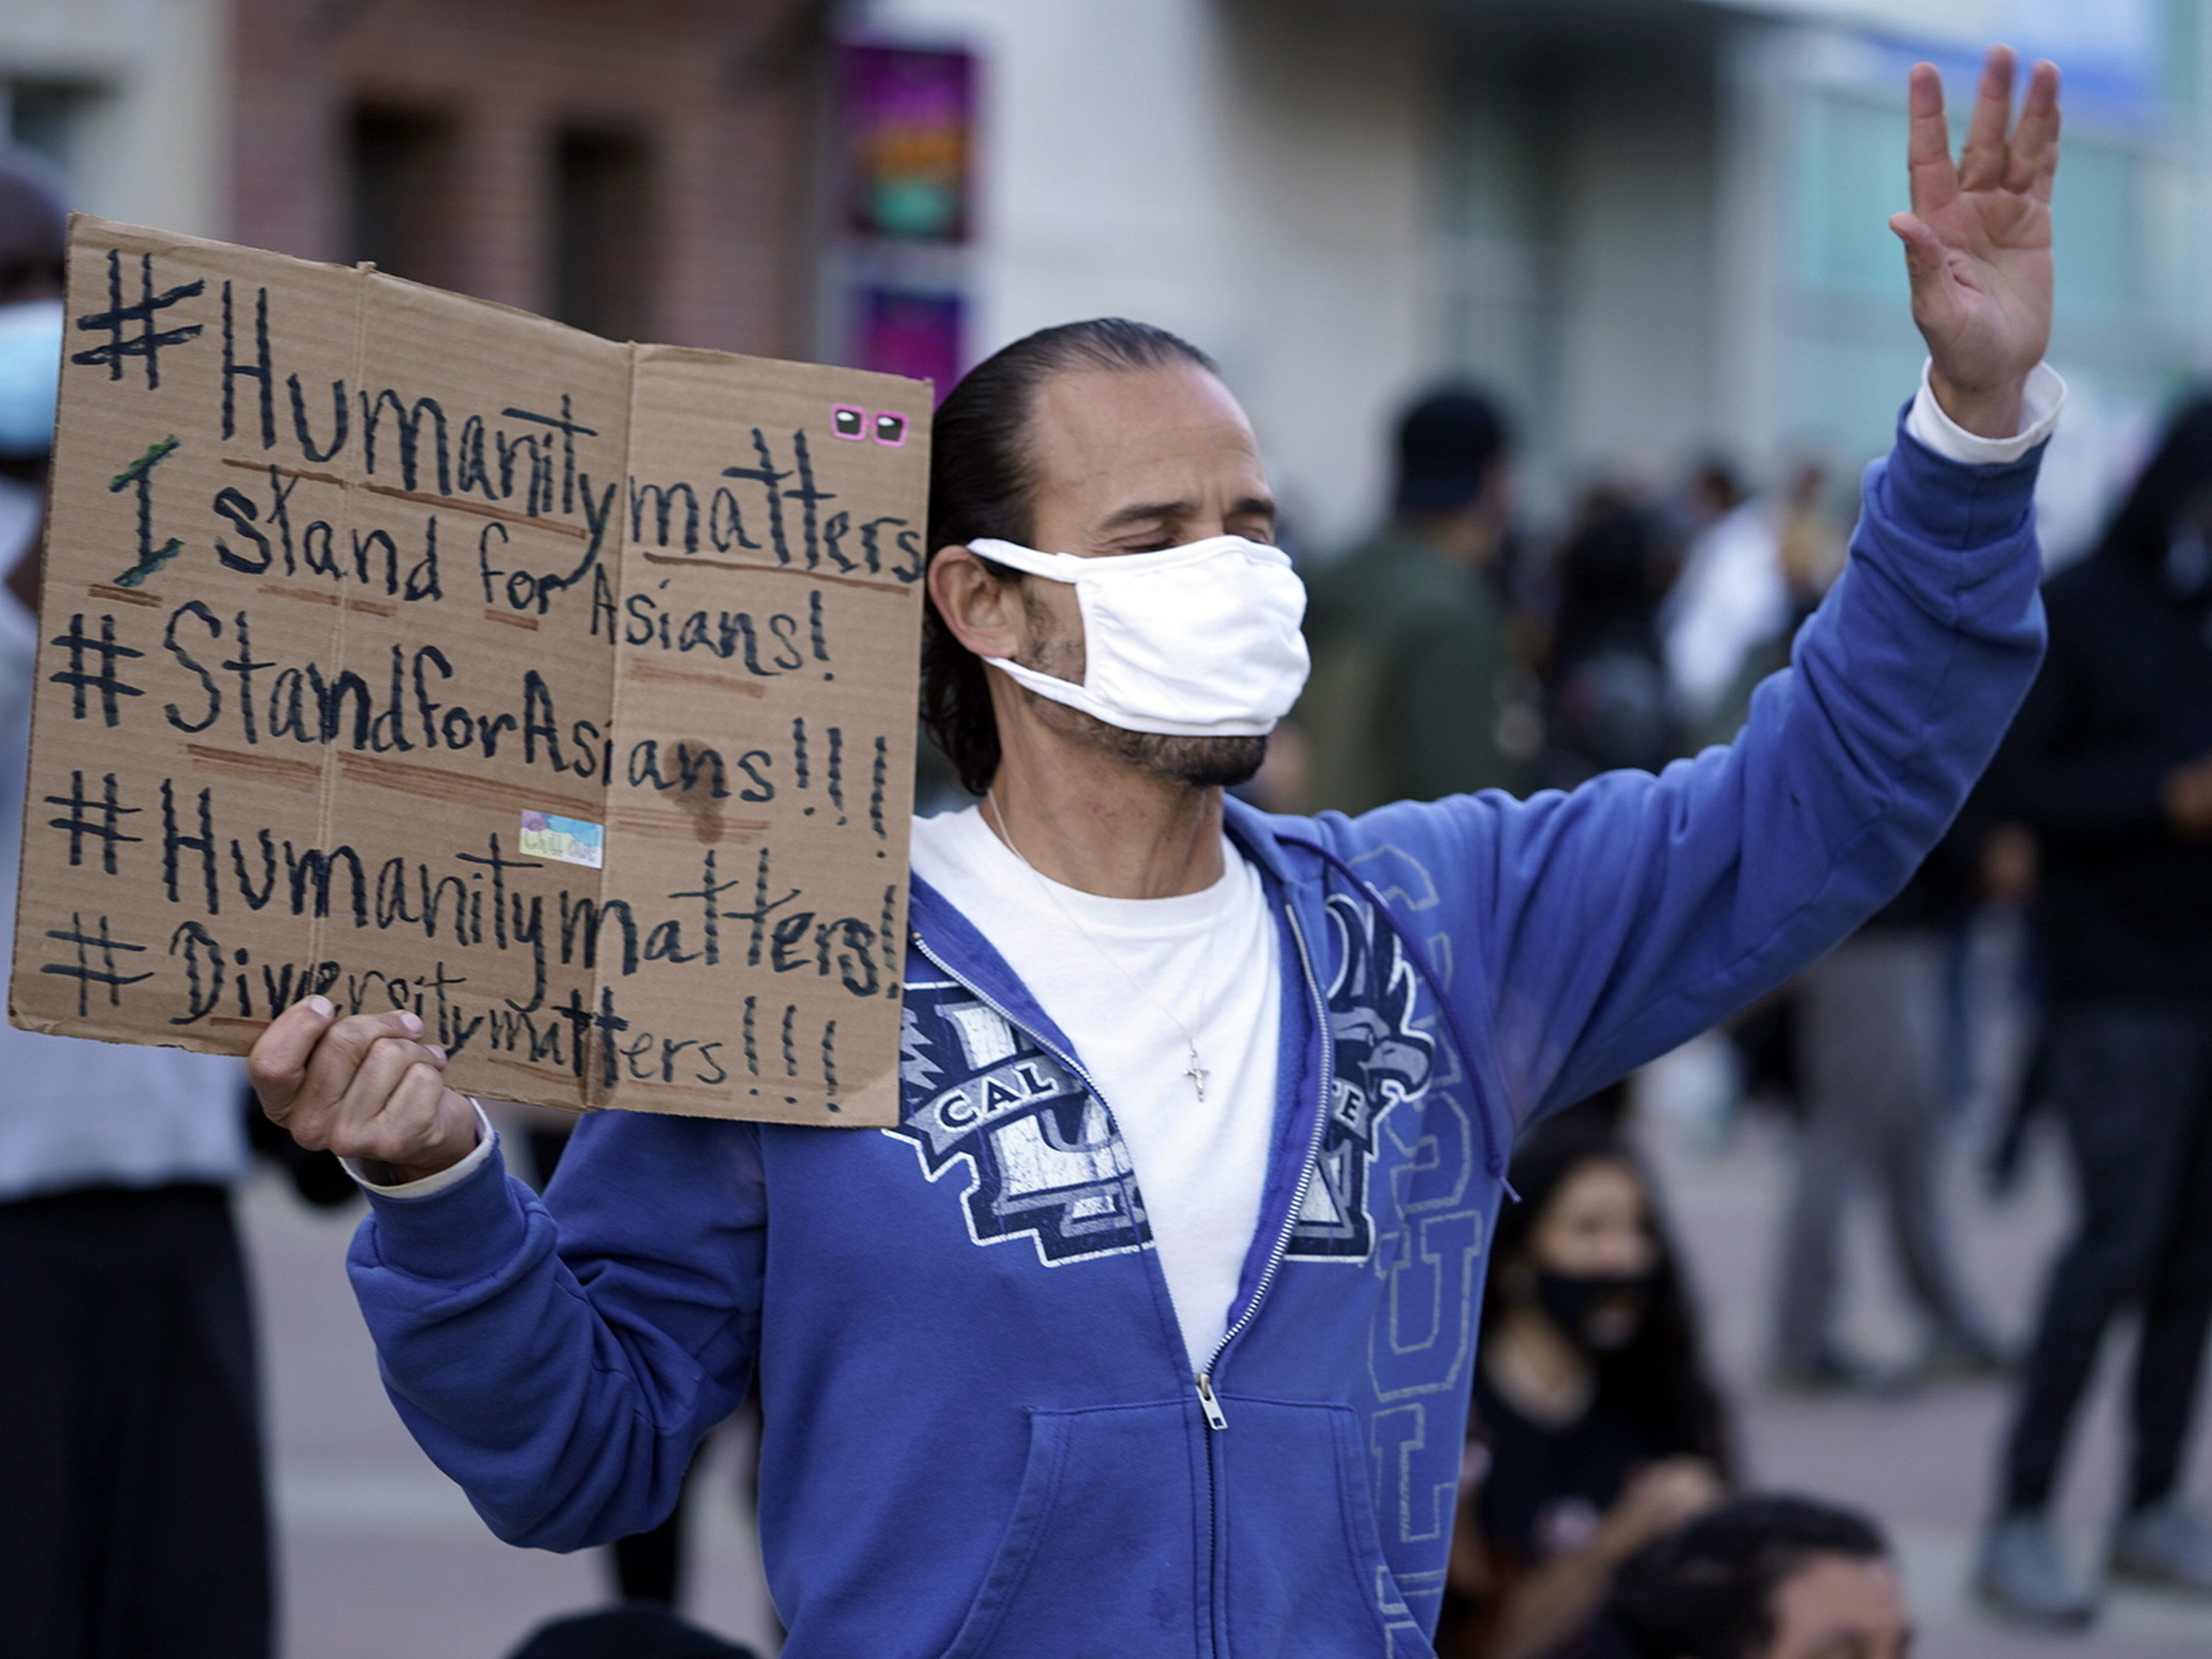 A man holds a cardboard sign that features a series of hashtags, including &quot;humanity matters,&quot; &quot;stand for Asians&quot; and &quot;diversity matters&quot;